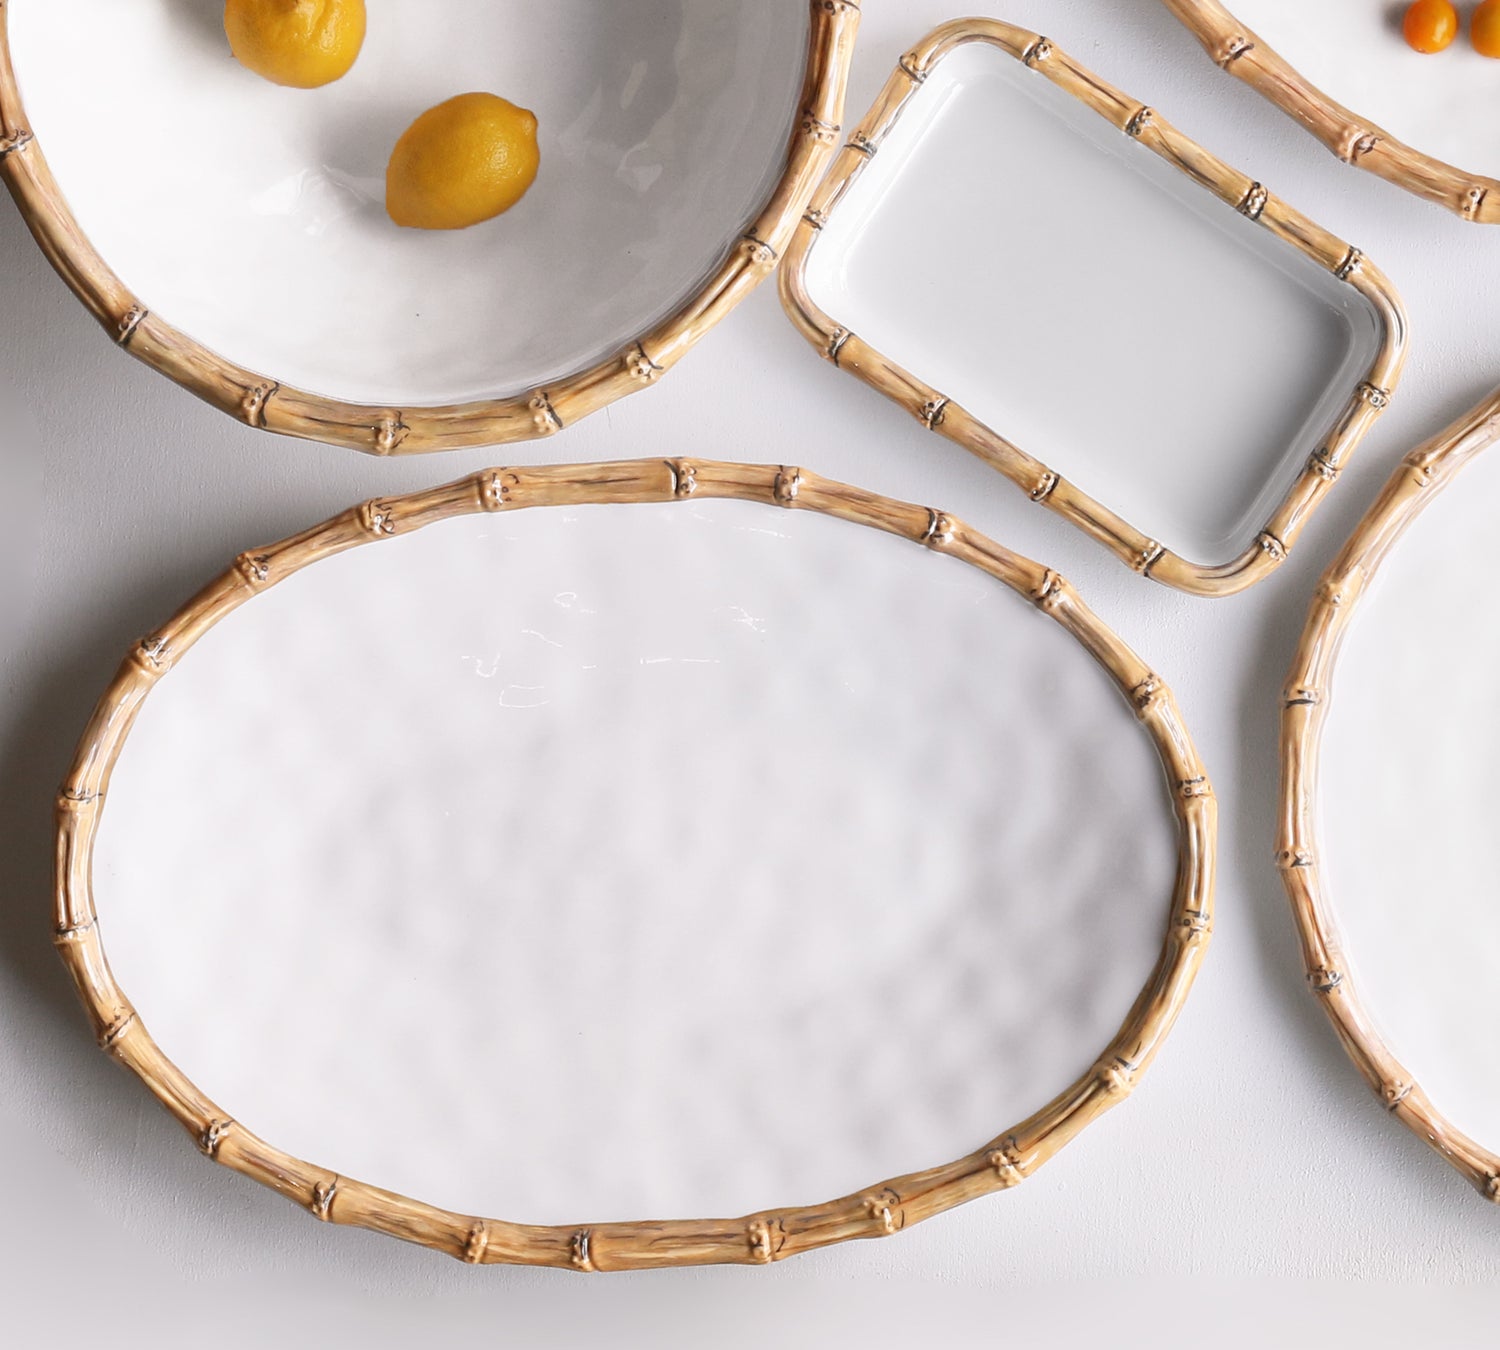 VIDA Bamboo Large Oval Platter (White and Natural)